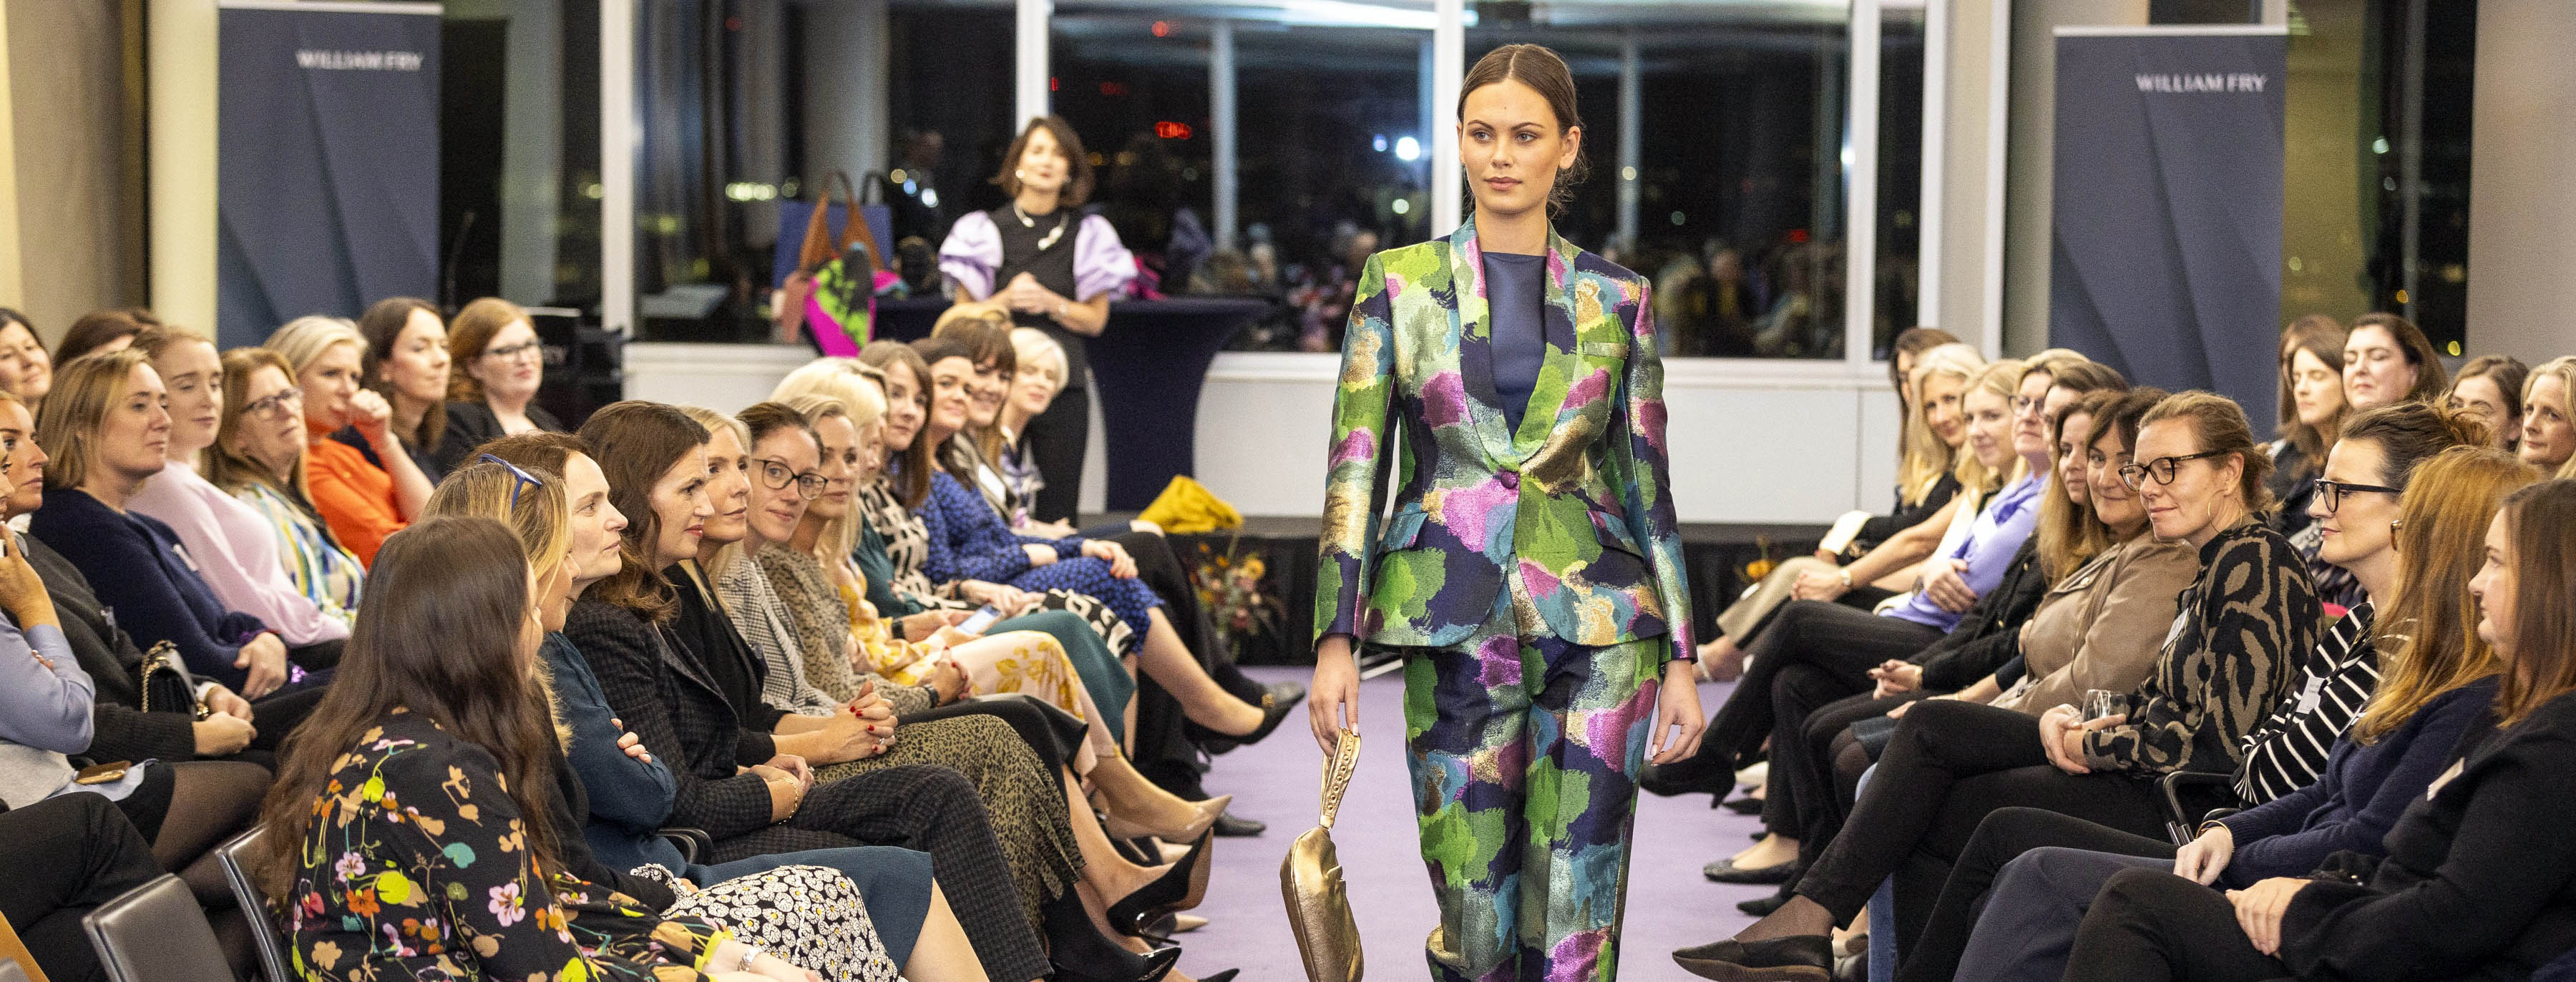 William Fry hosts fashion show at Dublin office